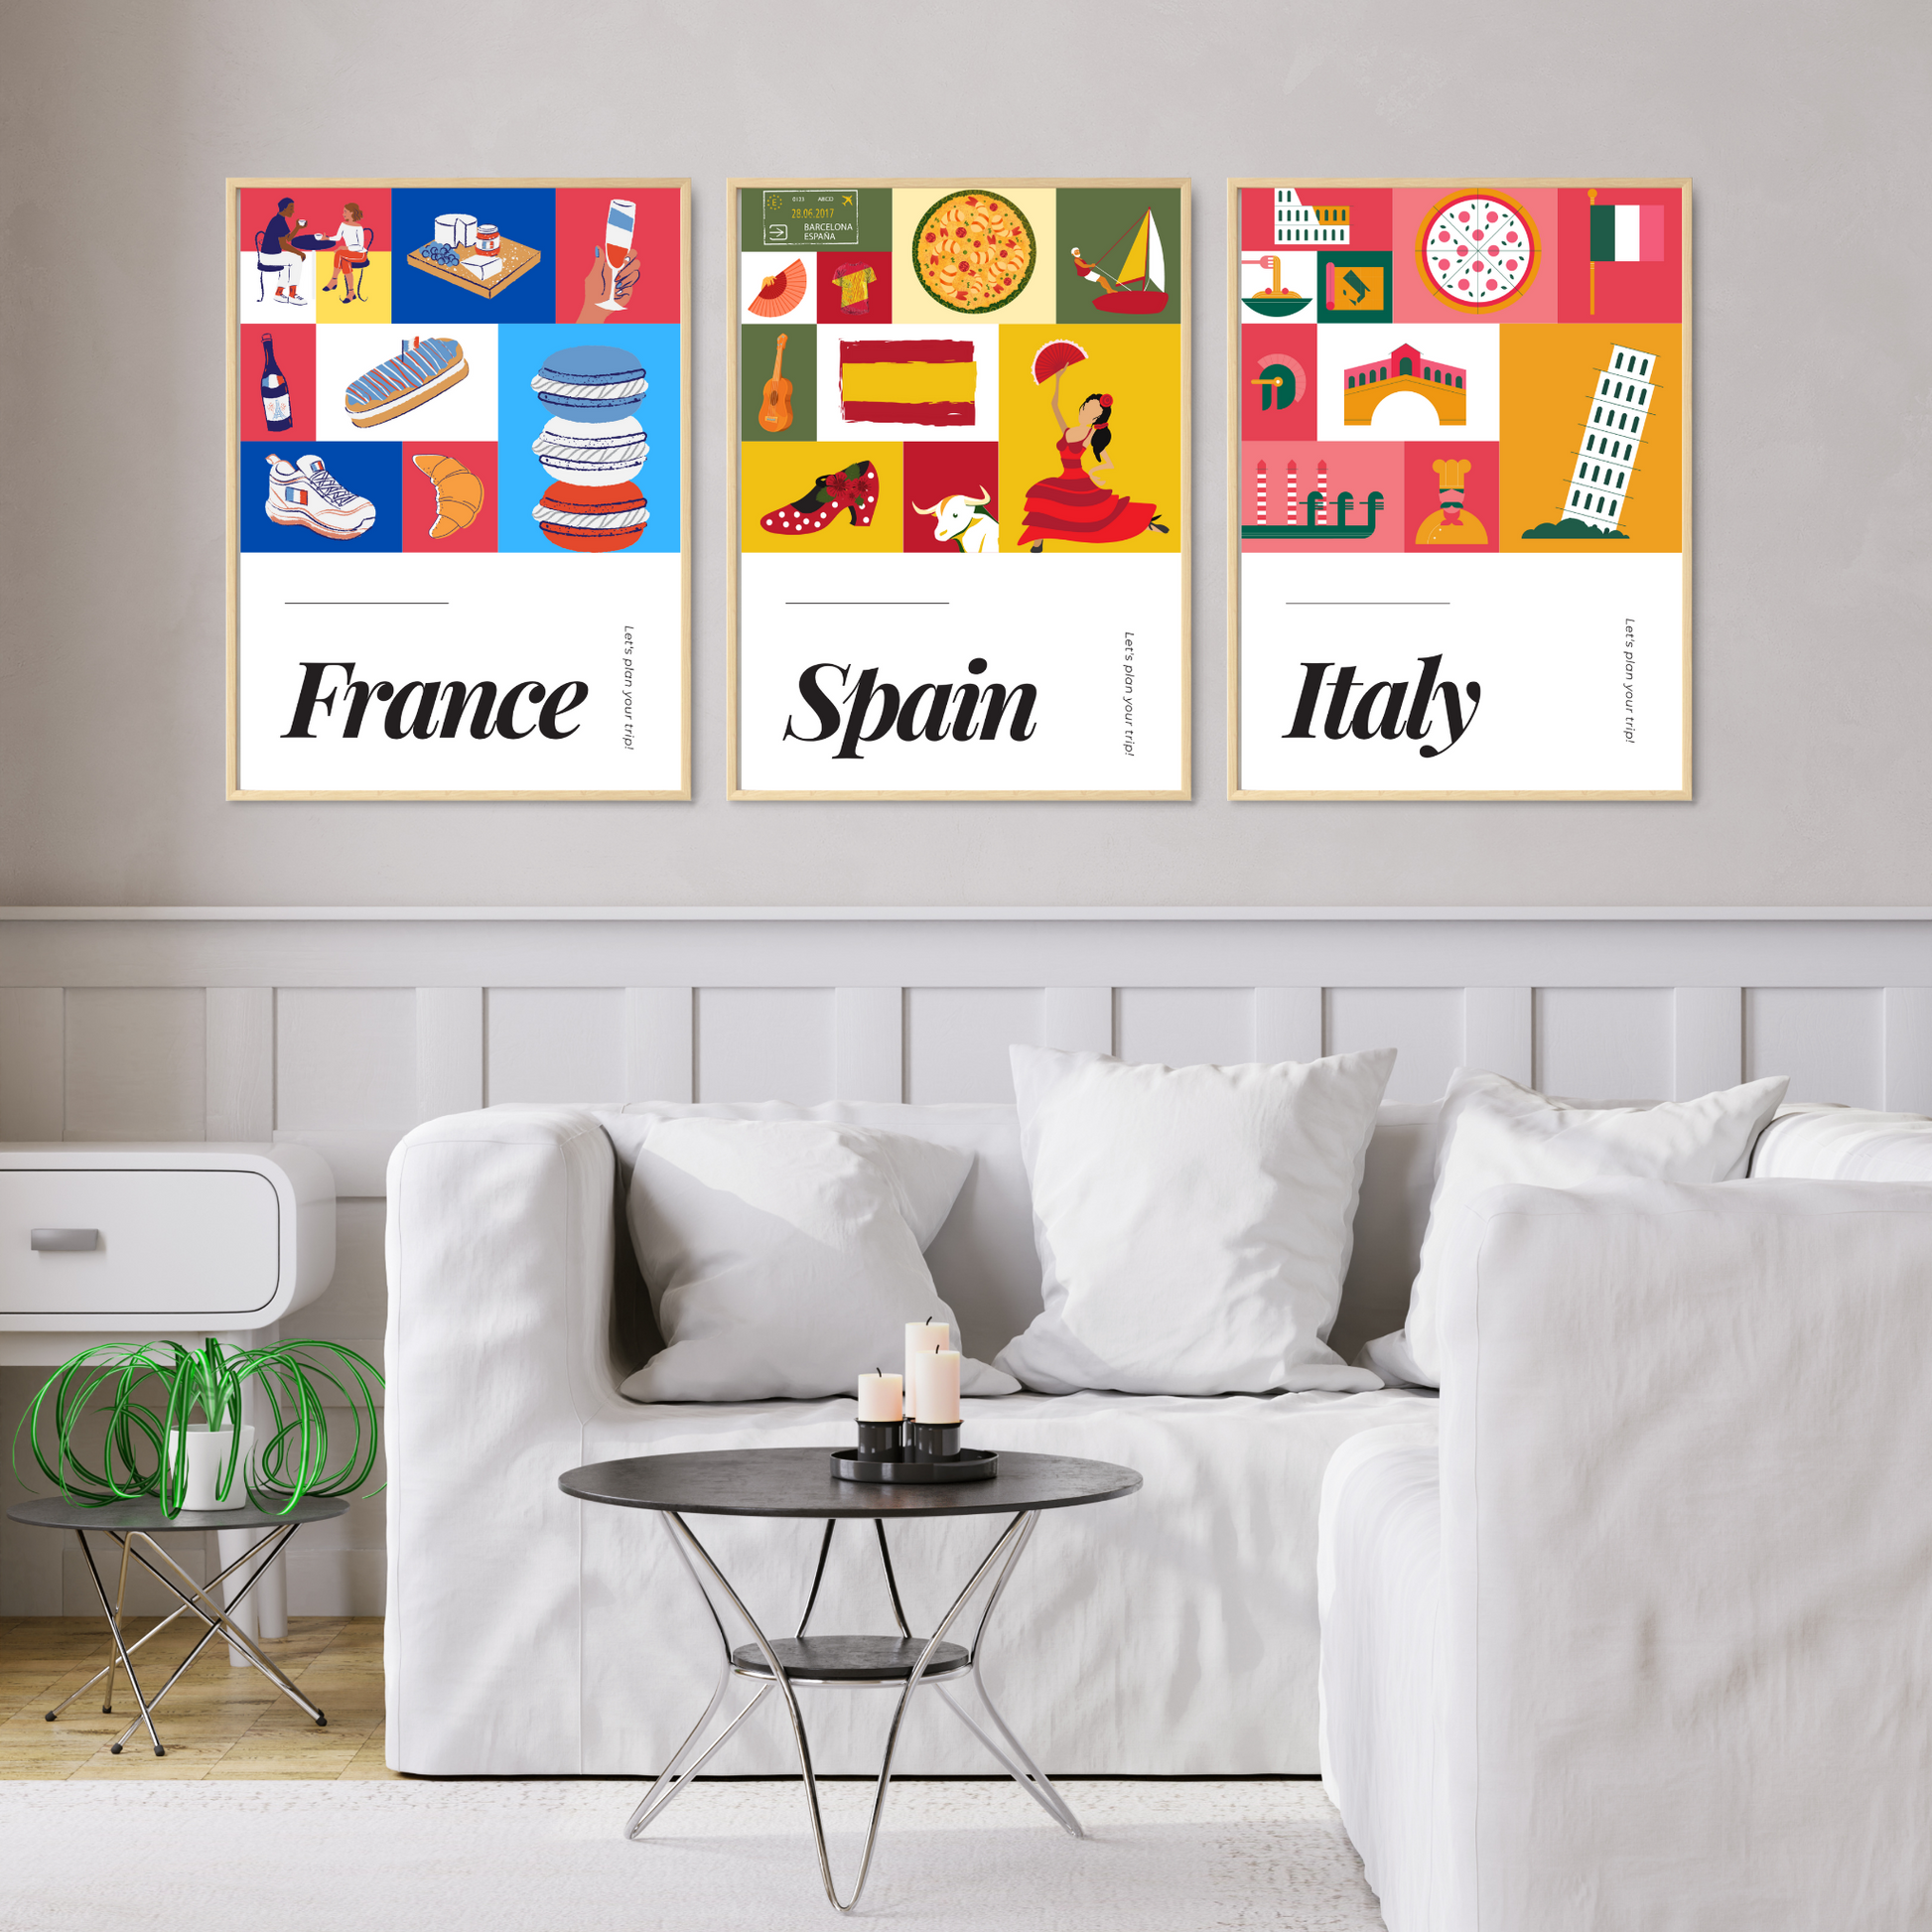 European Travel Posters - France - Spain - Italy - Poster Set.